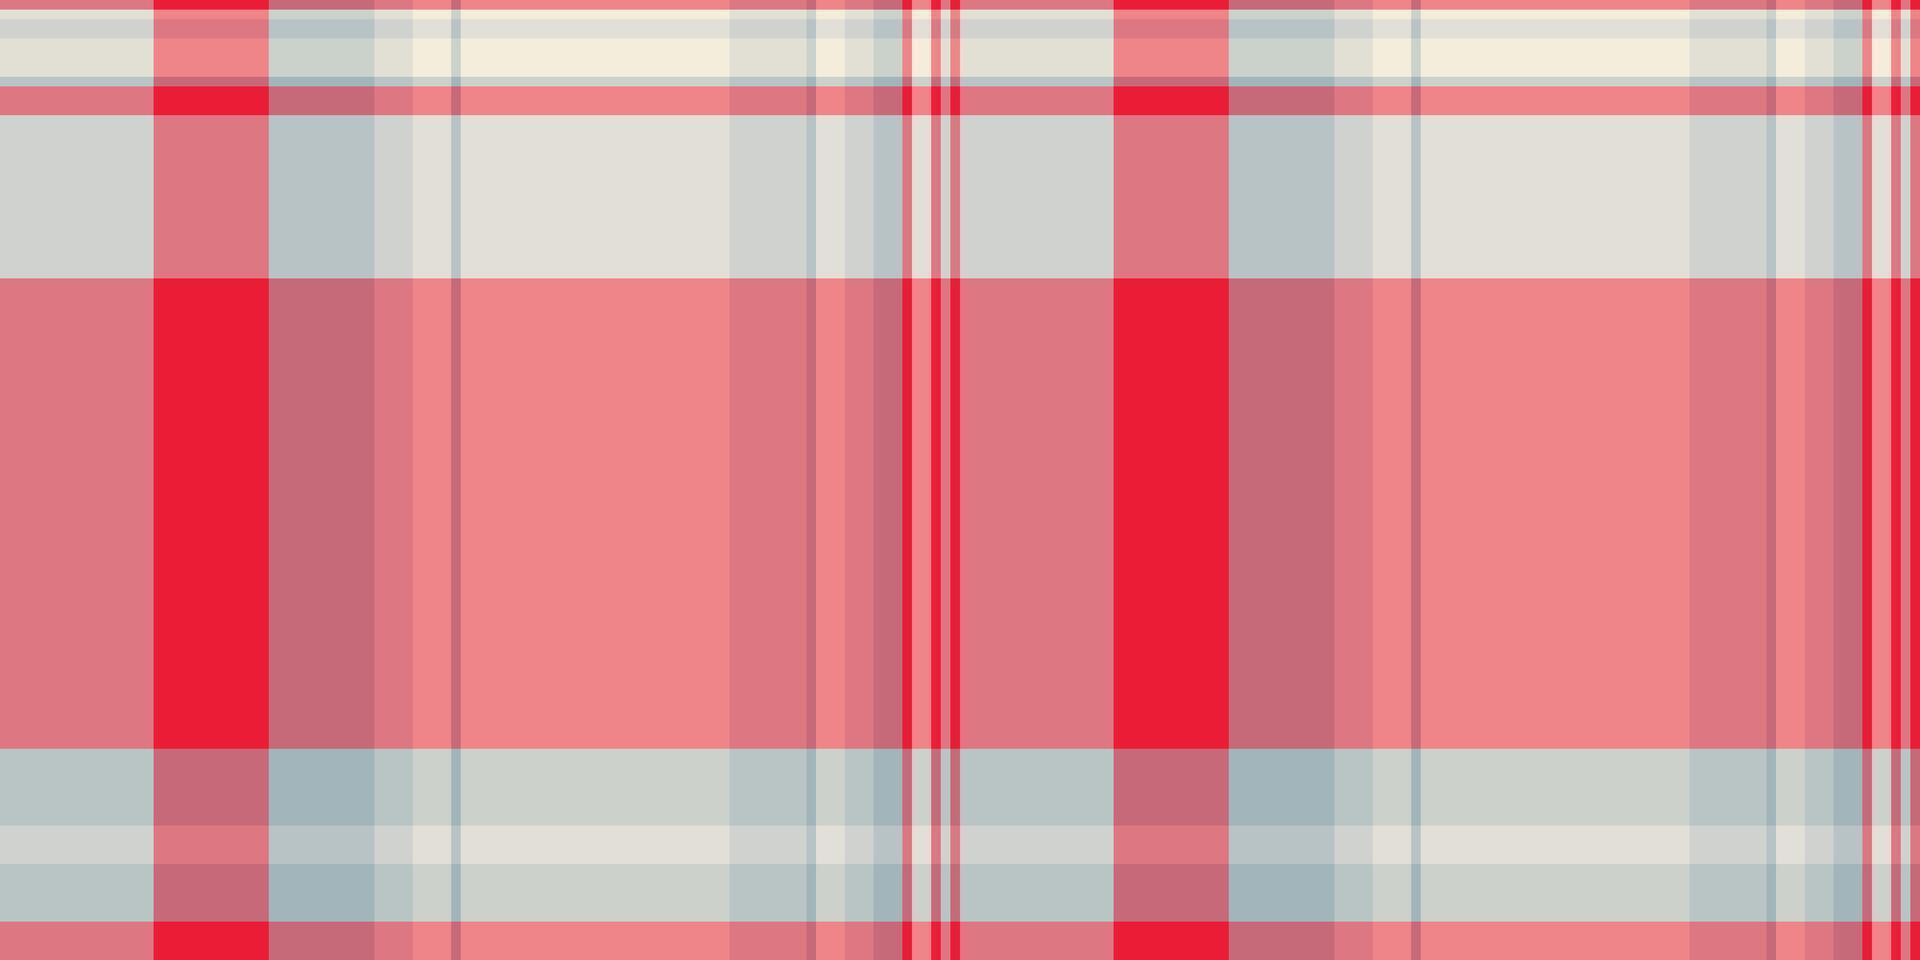 Spanish seamless pattern vector, repeatable patterns tartan background plaid. Majestic texture check textile fabric in red and white colors. vector